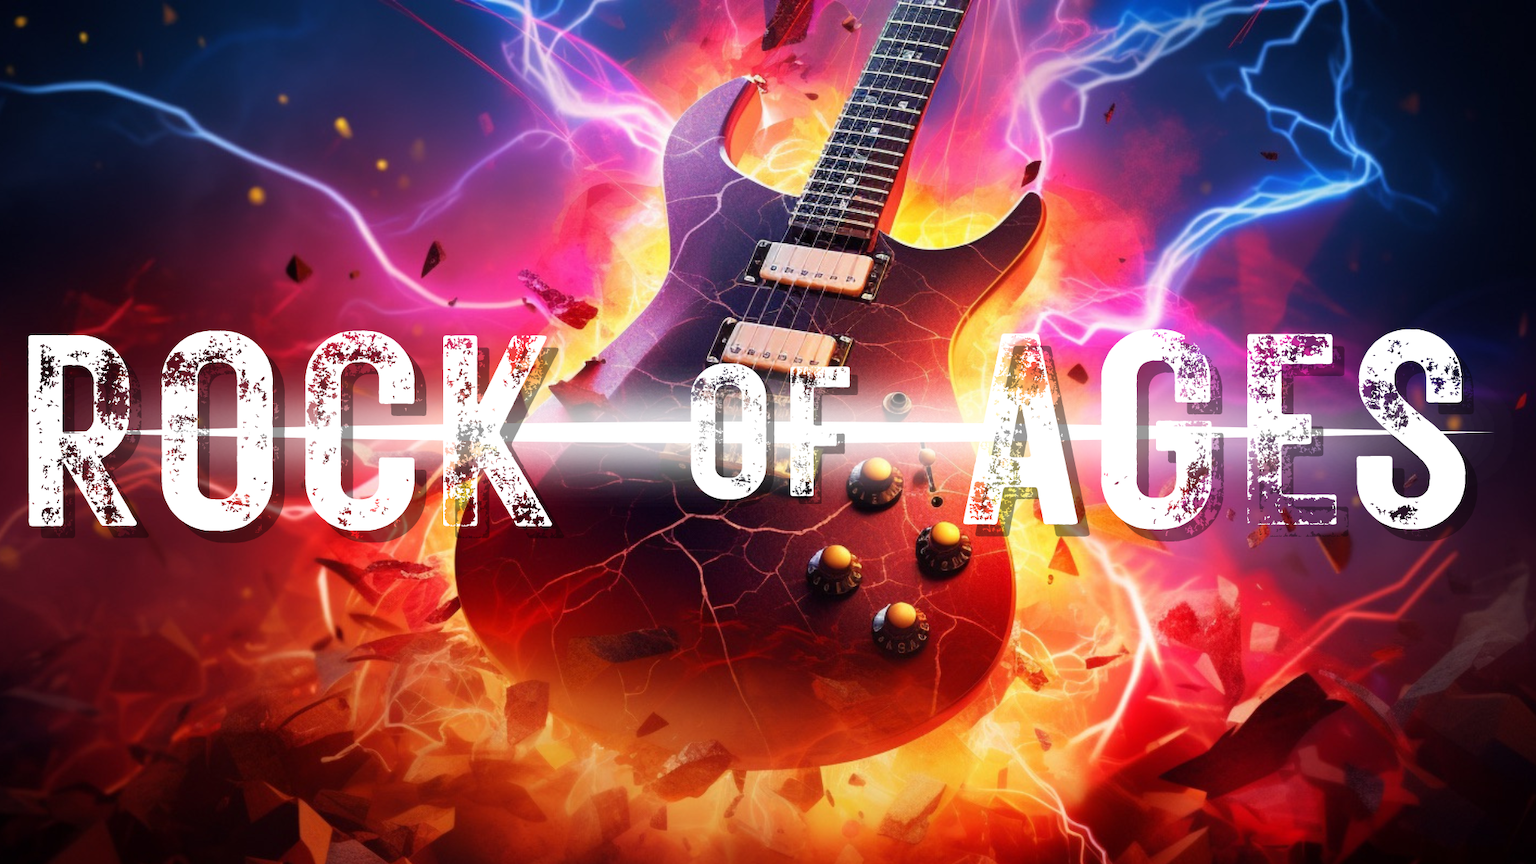 Rock of Ages Happening July 18th - Sept 8th